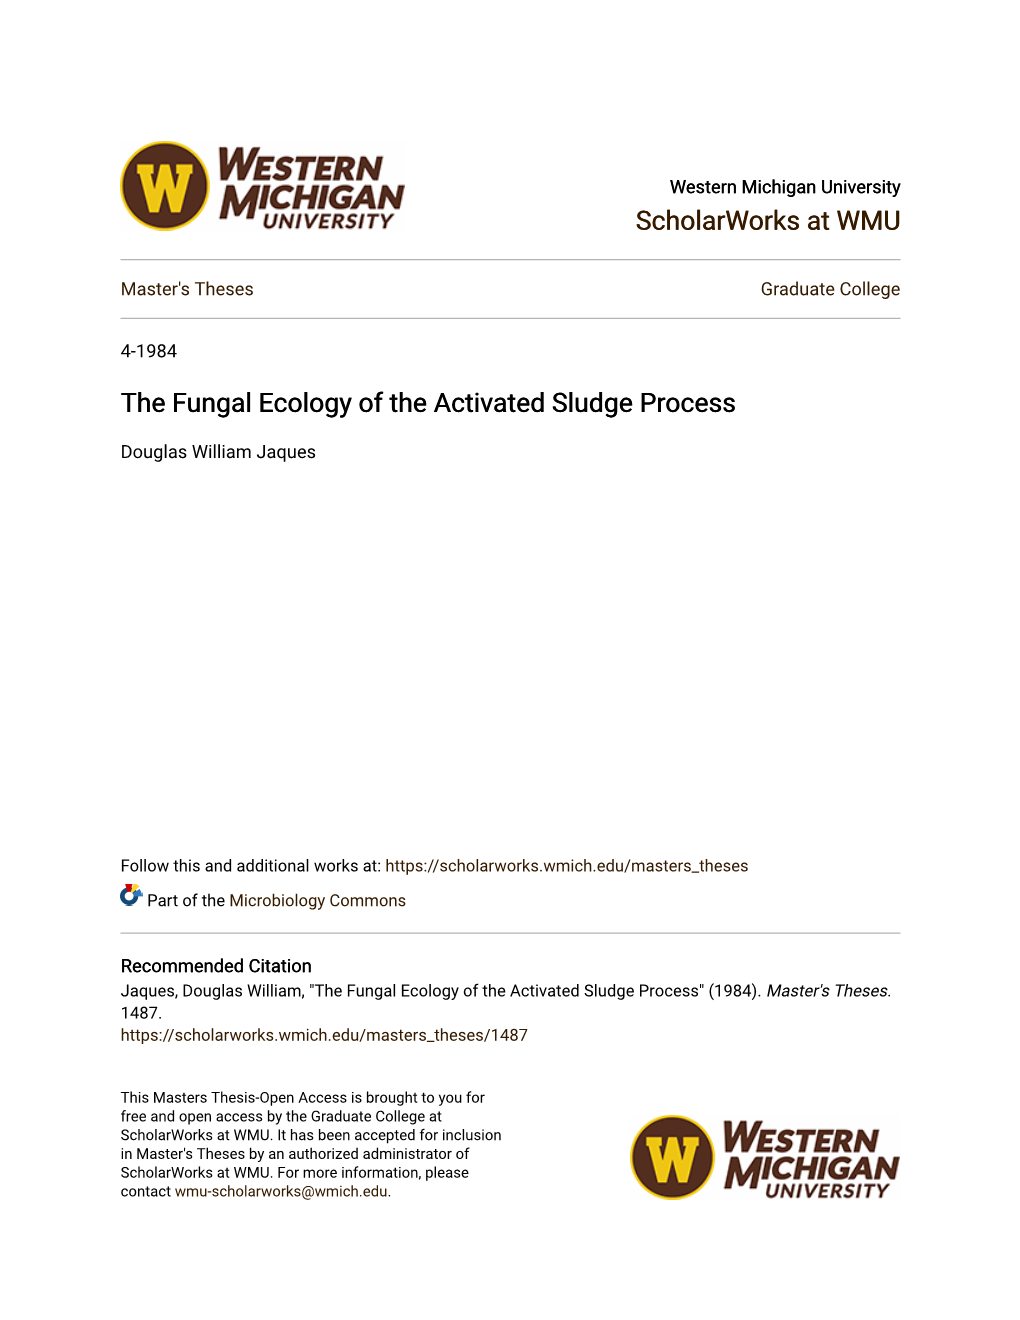 The Fungal Ecology of the Activated Sludge Process